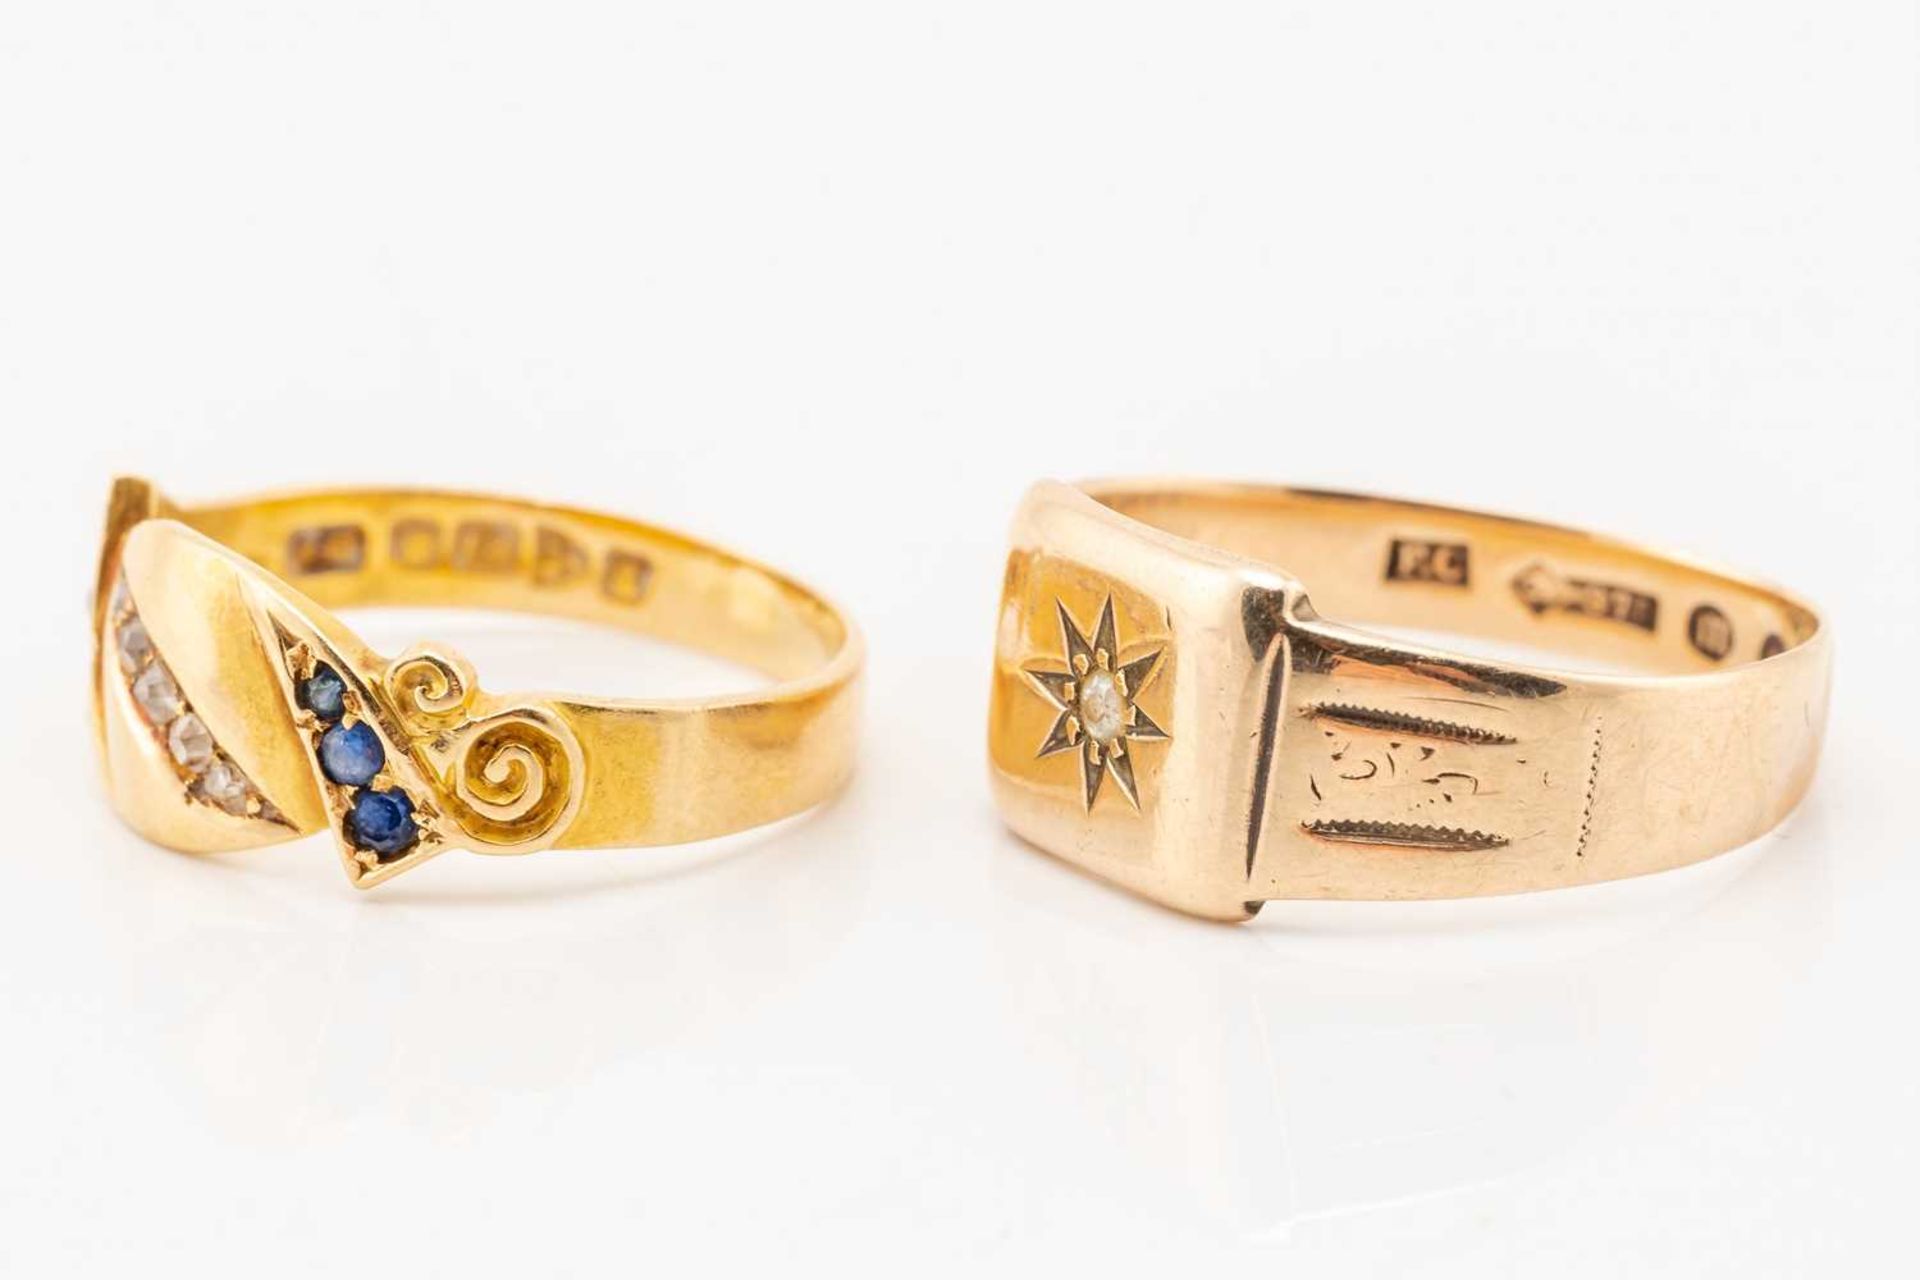 An Edwardian gem-set dress ring in 18ct gold and a diamond-set signet ring; the first ring comprises - Image 4 of 6